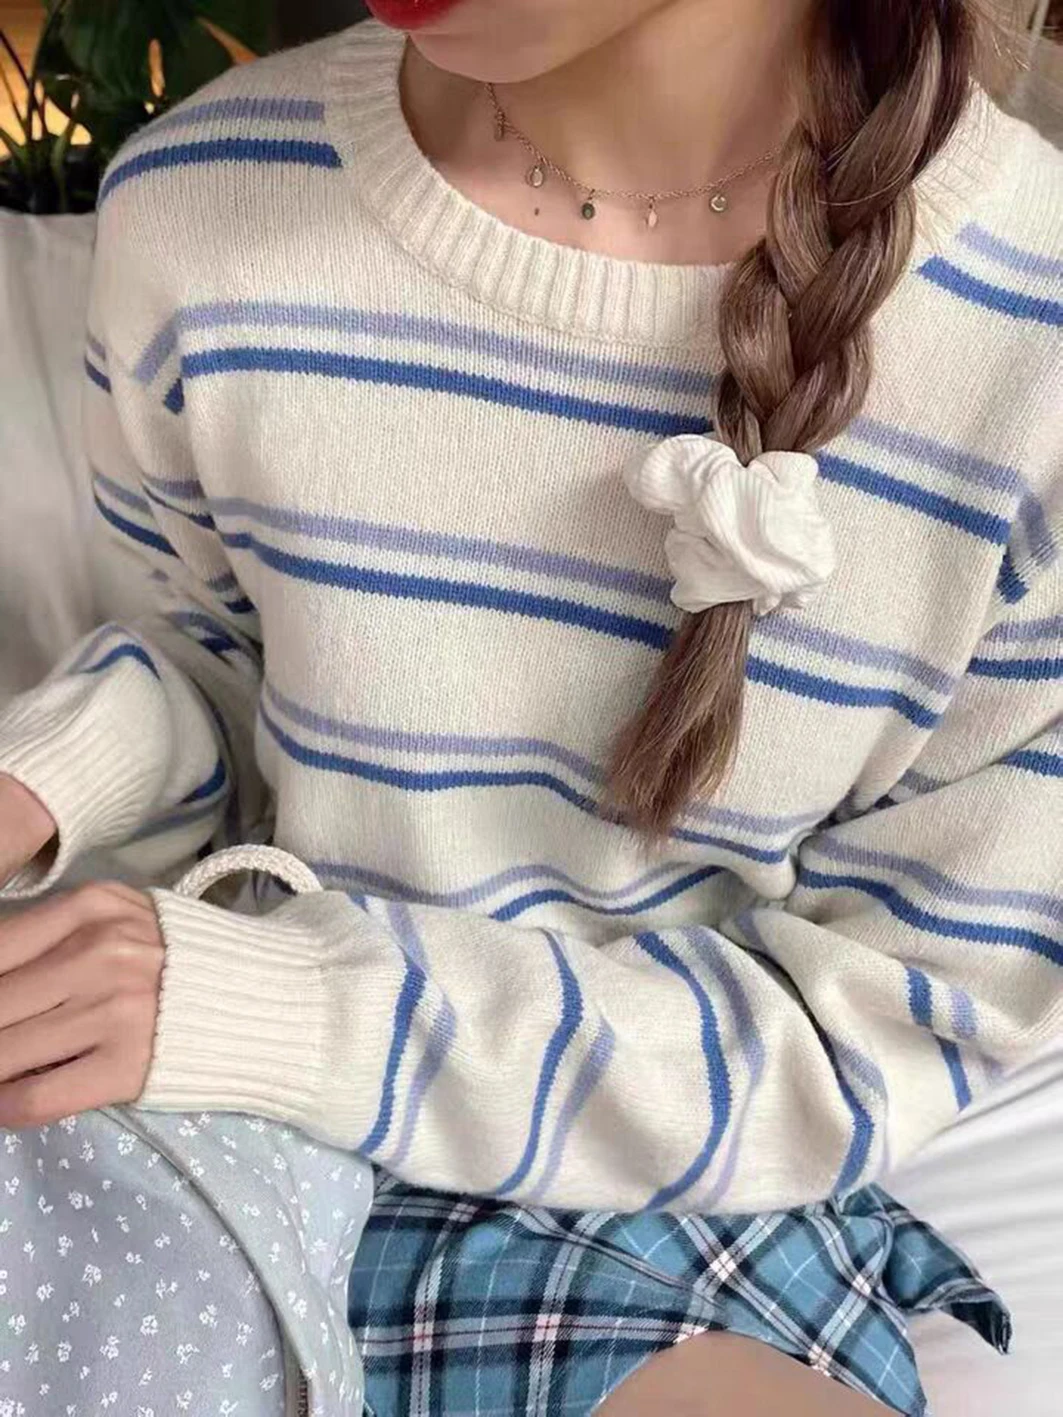 

Blue Stripes Sweet Knitted Sweater Autumn Round Neck Long Sleeve Casual Cute Pullover Top For Woman Harajuku Preppy Style Jumper